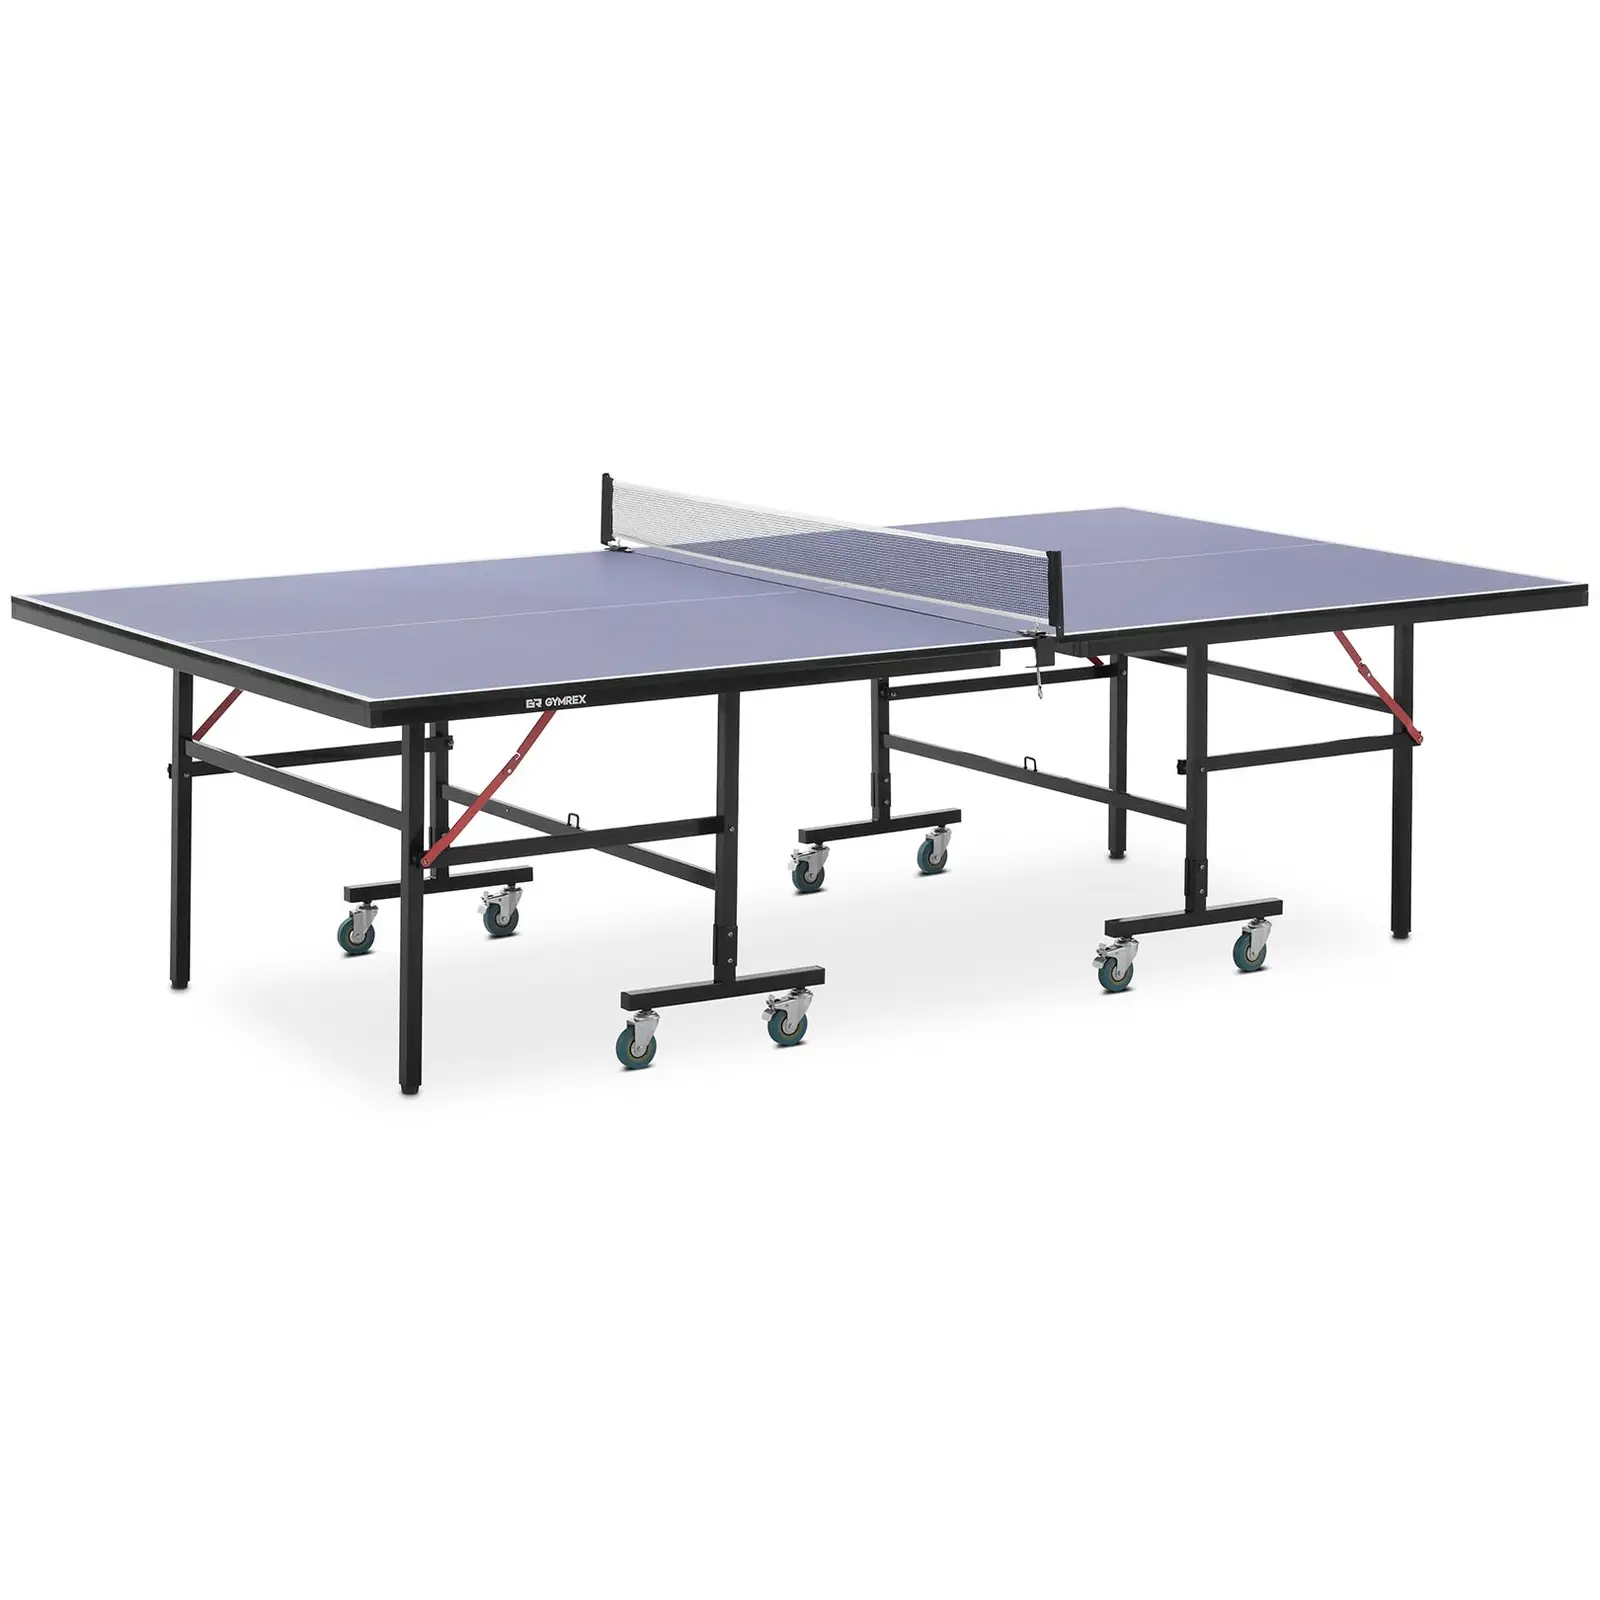 Table Tennis Table - indoor - foldable - rollable